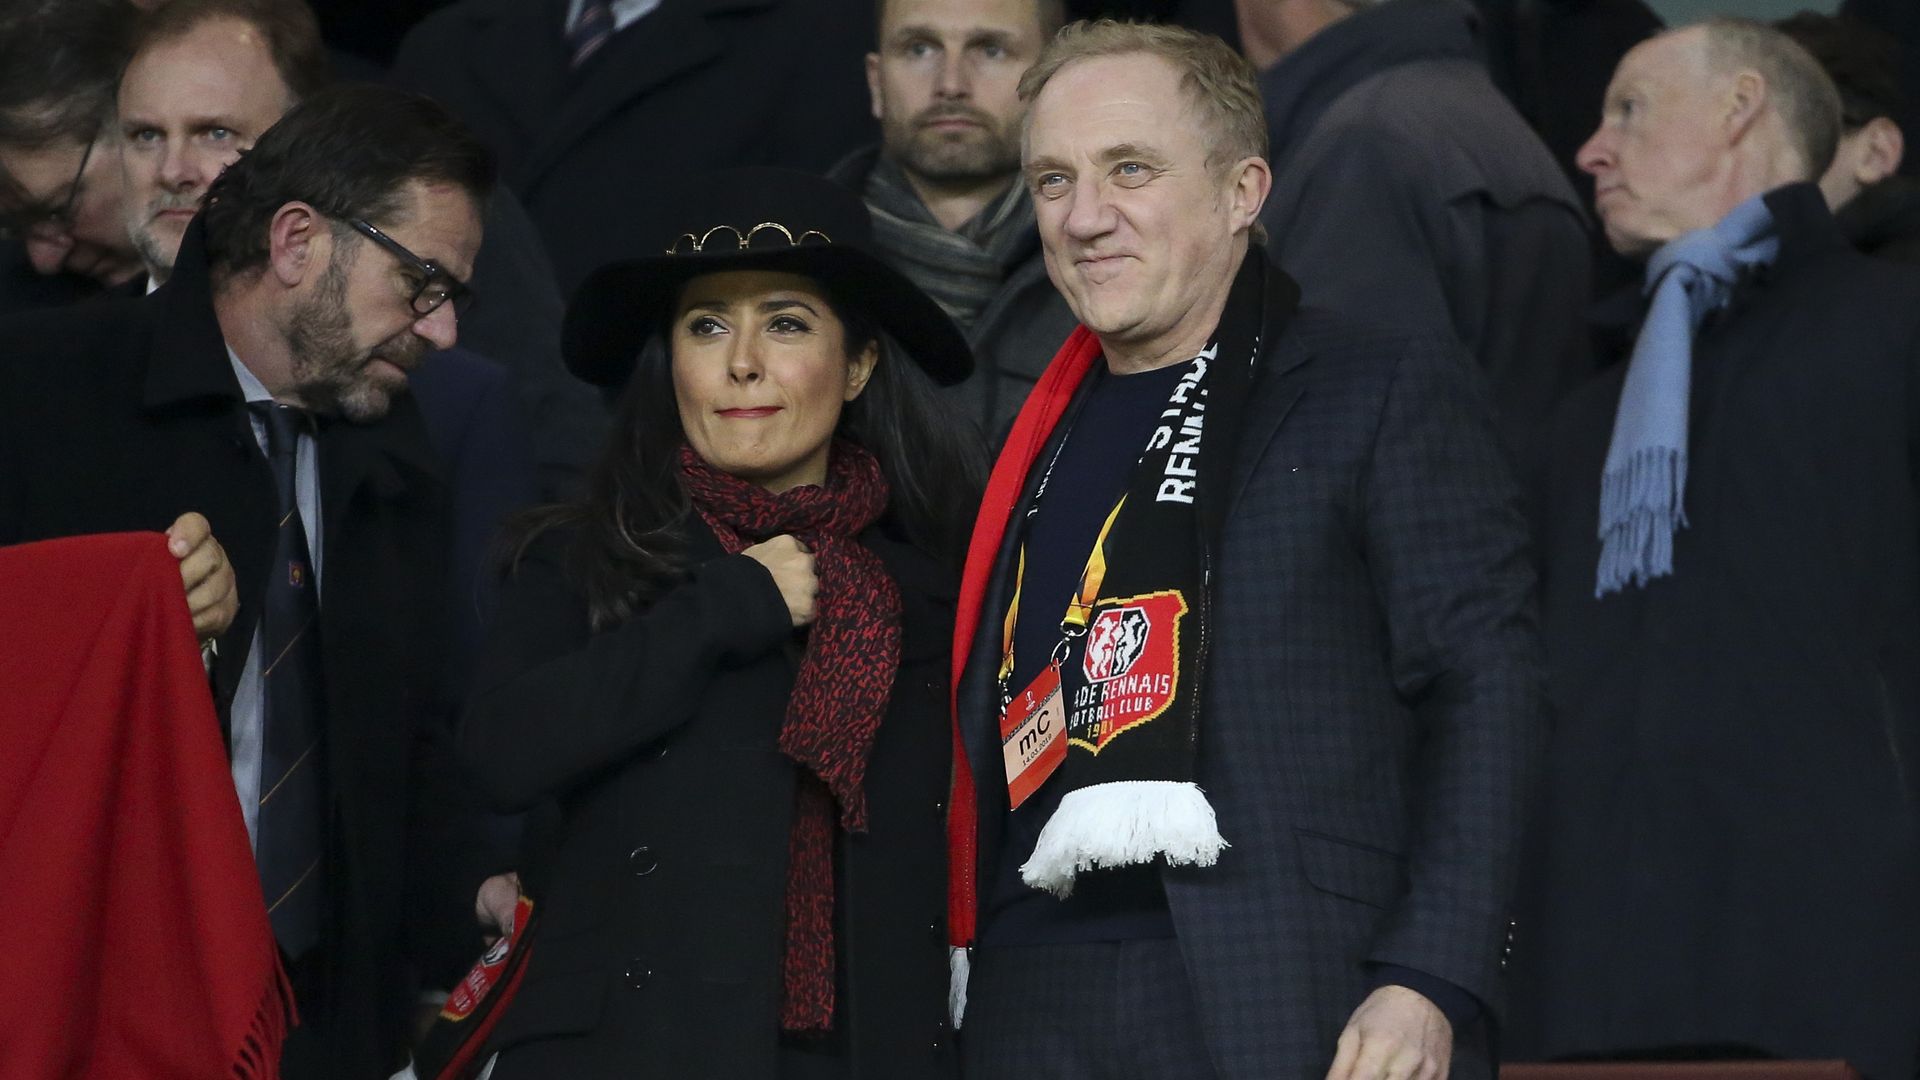 Stade Rennais owner and CEO of Kering Group François-Henri Pinault and his wife, actress Salma Hayek at a soccer match.